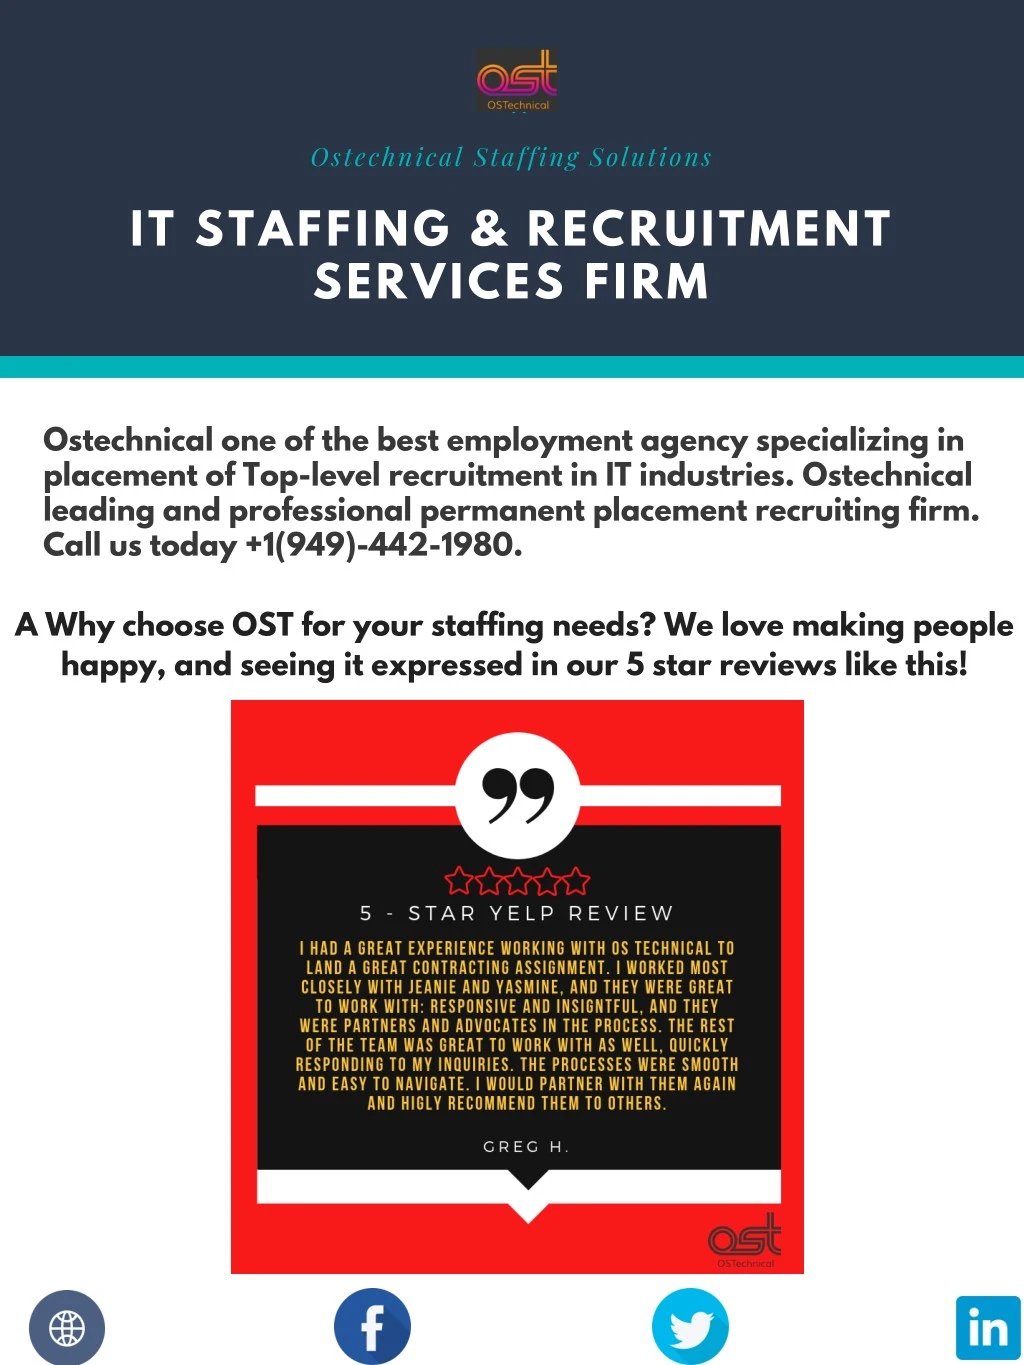 ostechnical staffing solutions